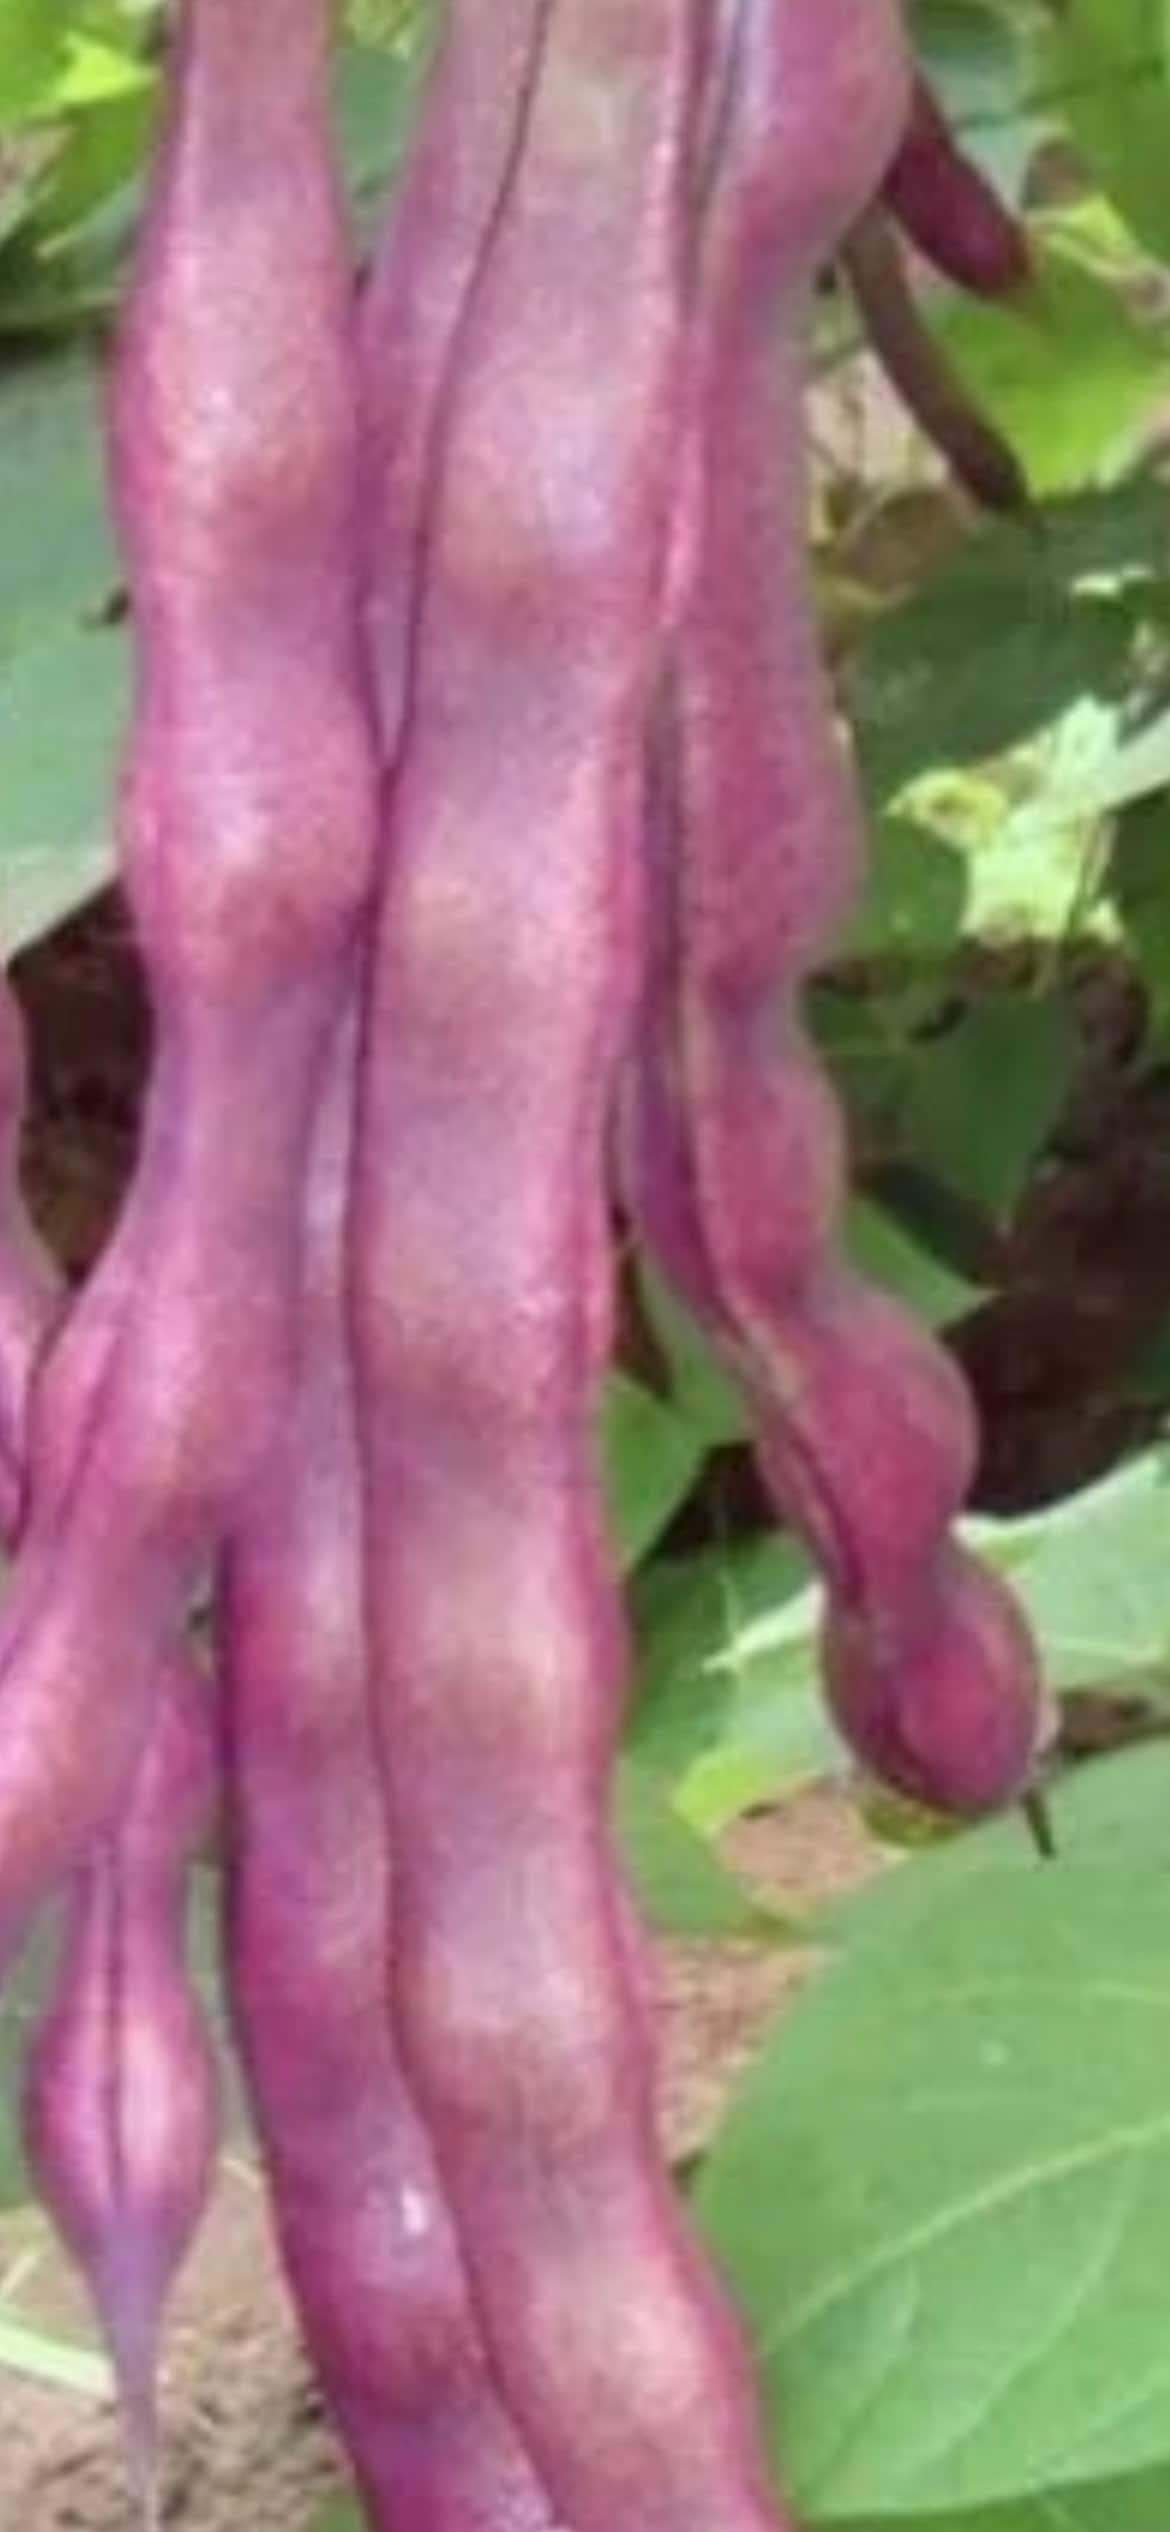 Autumn Purple Bean Seeds - 18 Seeds per Order, High-Yield Variety with Exceptional Flavor and Vibrant Purple Pods